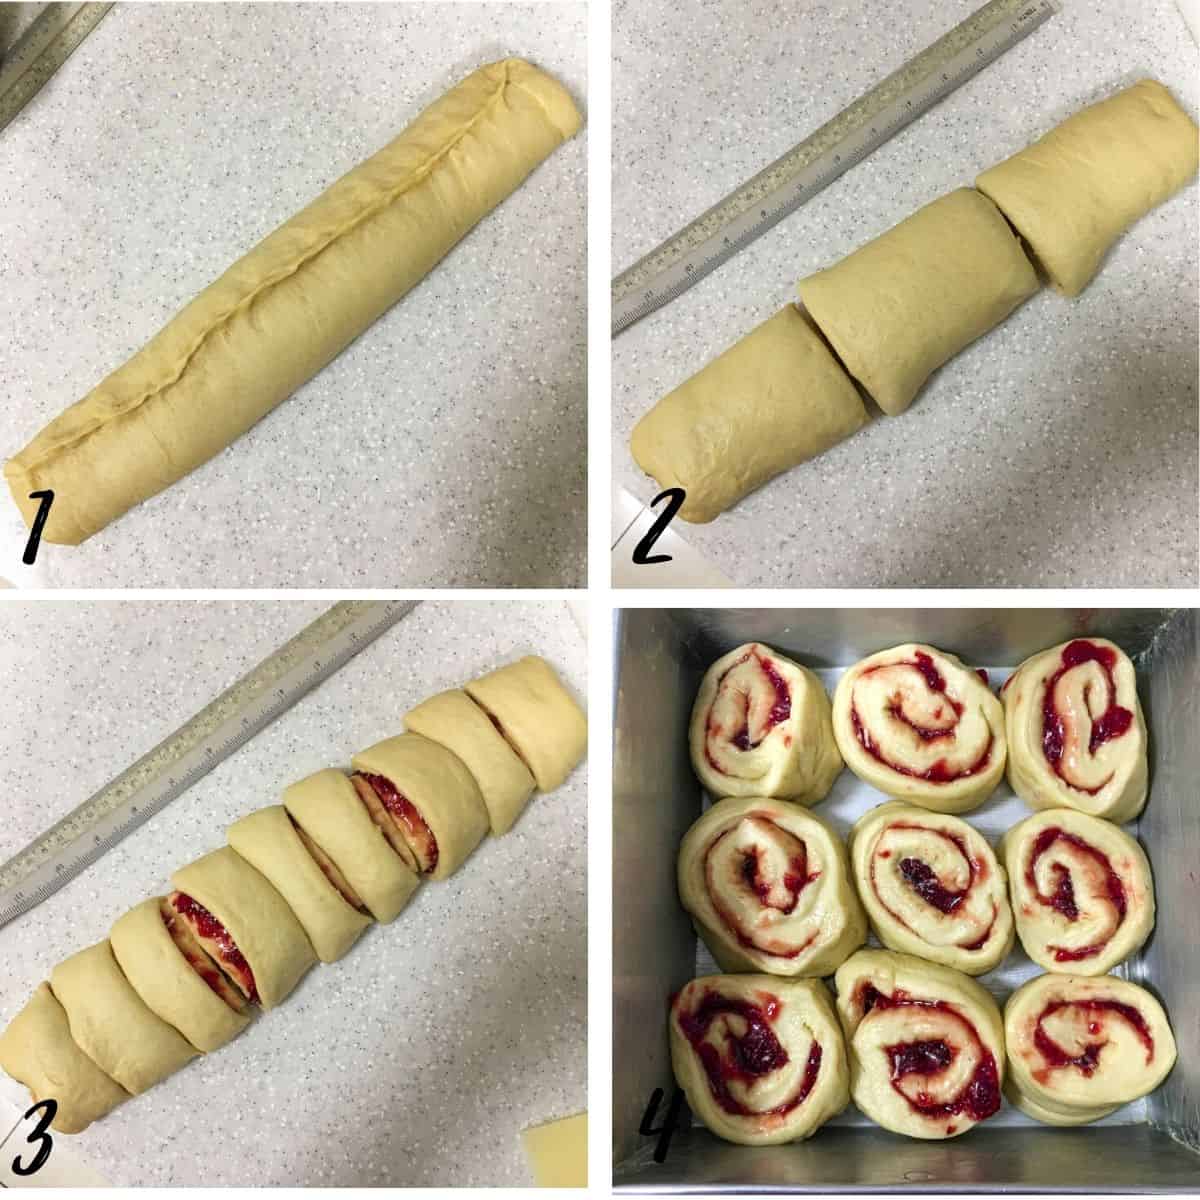 A poster of 4 images showing how to cut a cinnamon roll dough into sections and arrange in a tray.